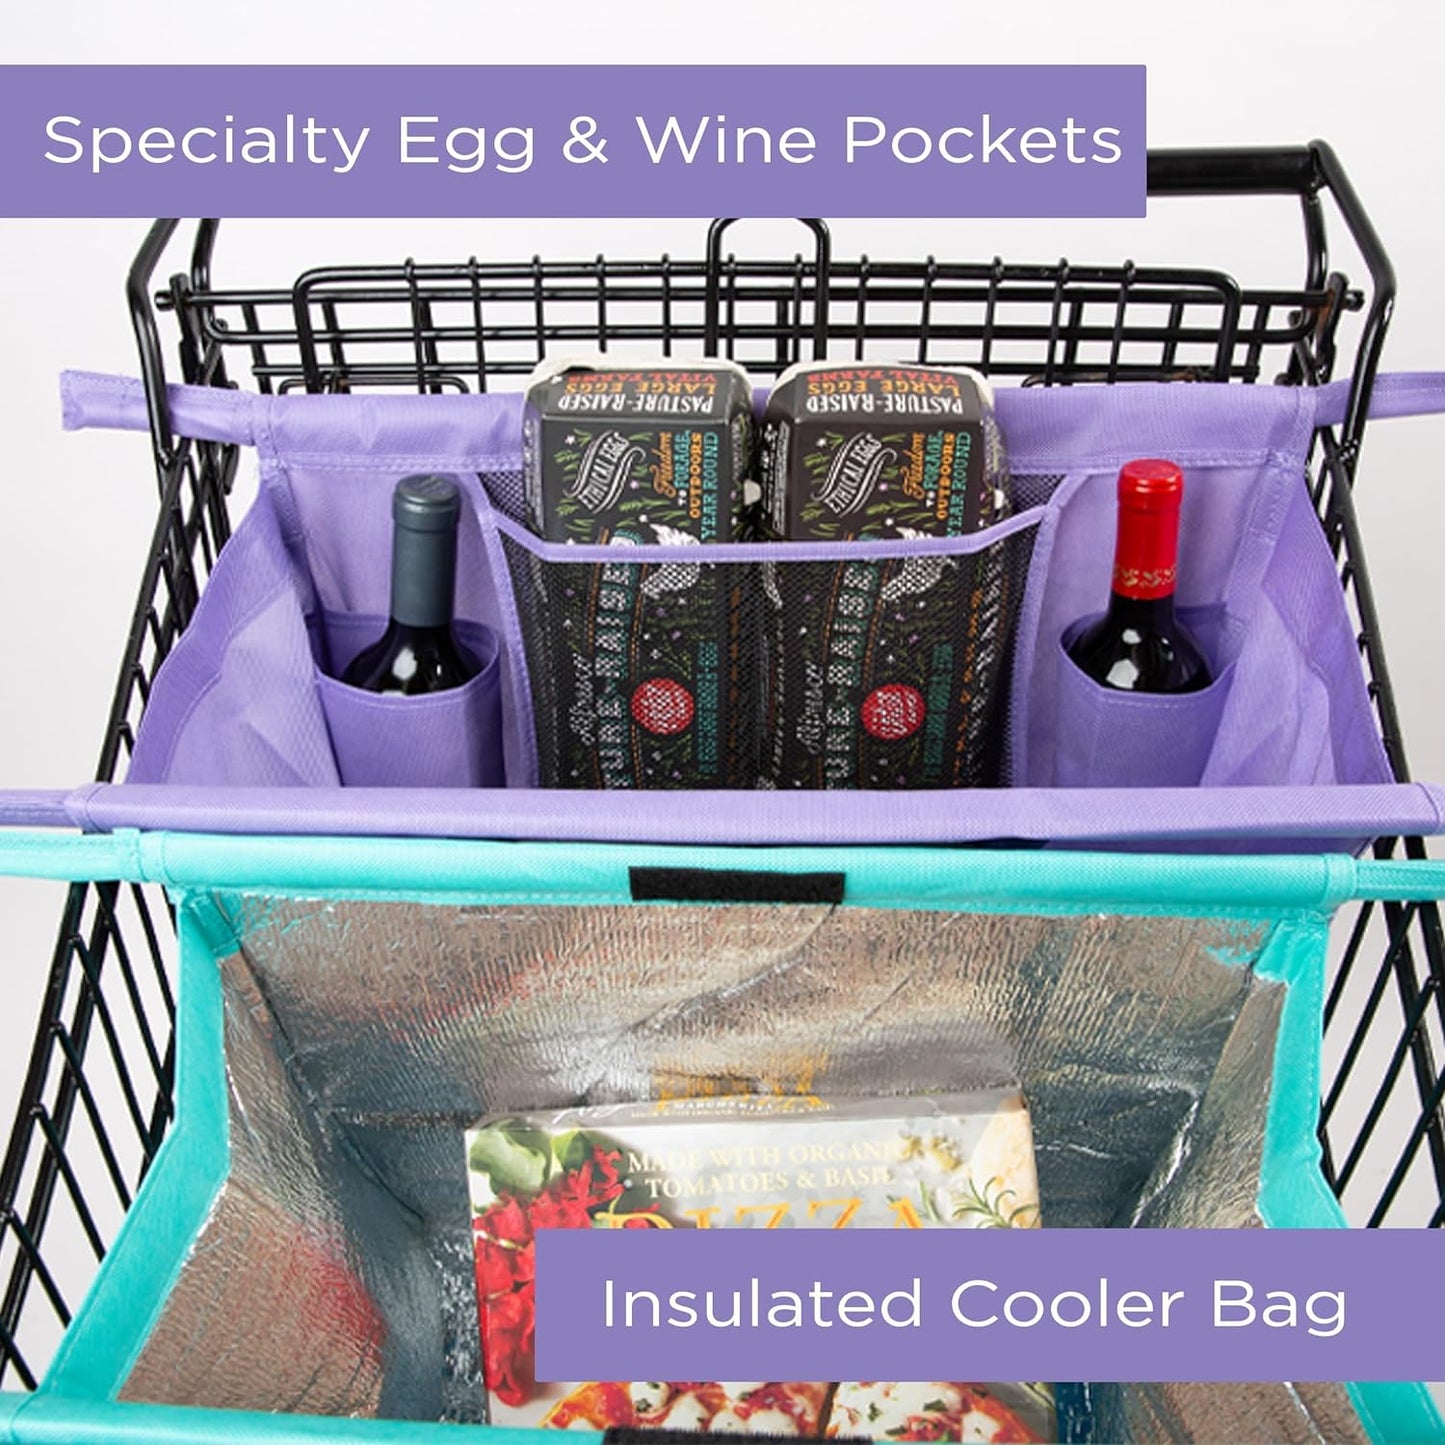 Grocery Store Reusable Easy Cart and Pack Set of 4 -W/Lrg COOLER Bag & Egg/Wine Holder! Reusable Grocery Cart Bags Sized for USA. Washable Eco-Friendly 4-Bag Grocery Tote. 